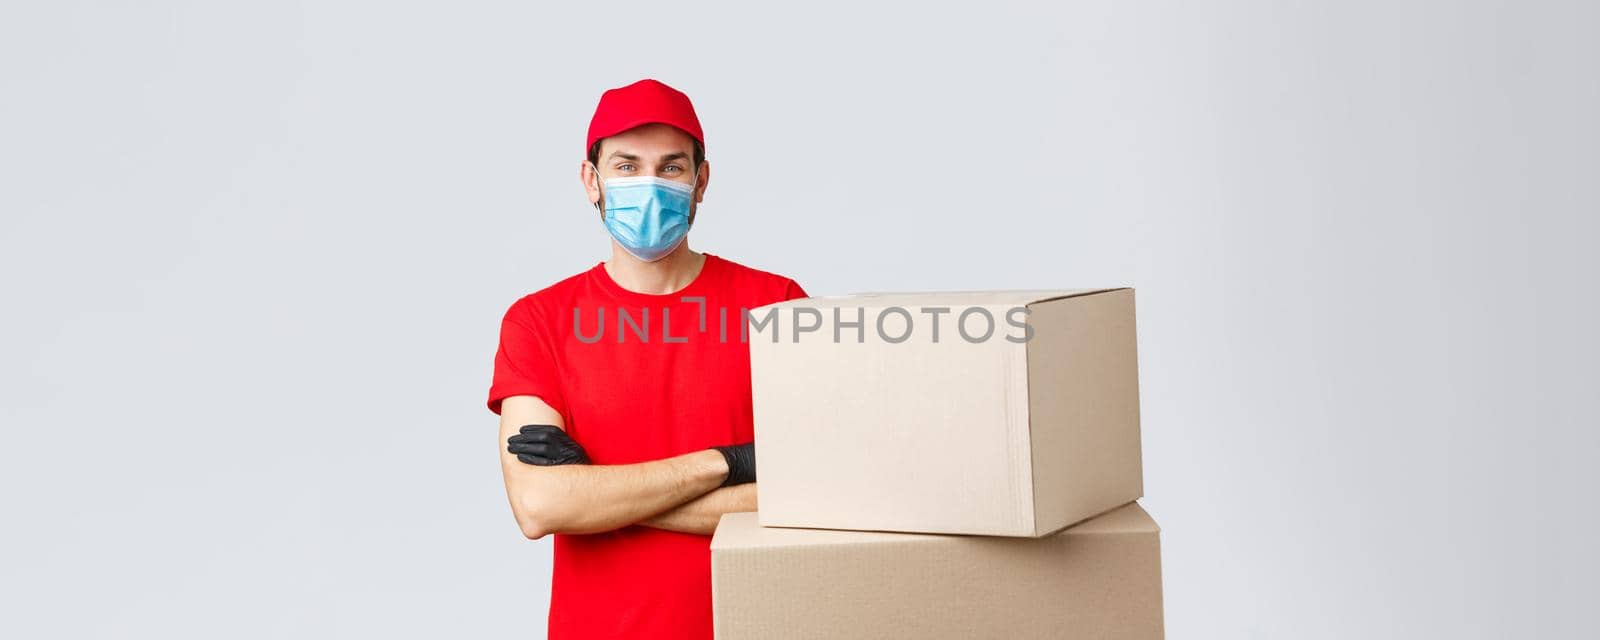 Packages and parcels delivery, covid-19 quarantine and transfer orders. Confident young courier in red uniform, gloves and medical mask, cross arms as standing boxes, grey background.